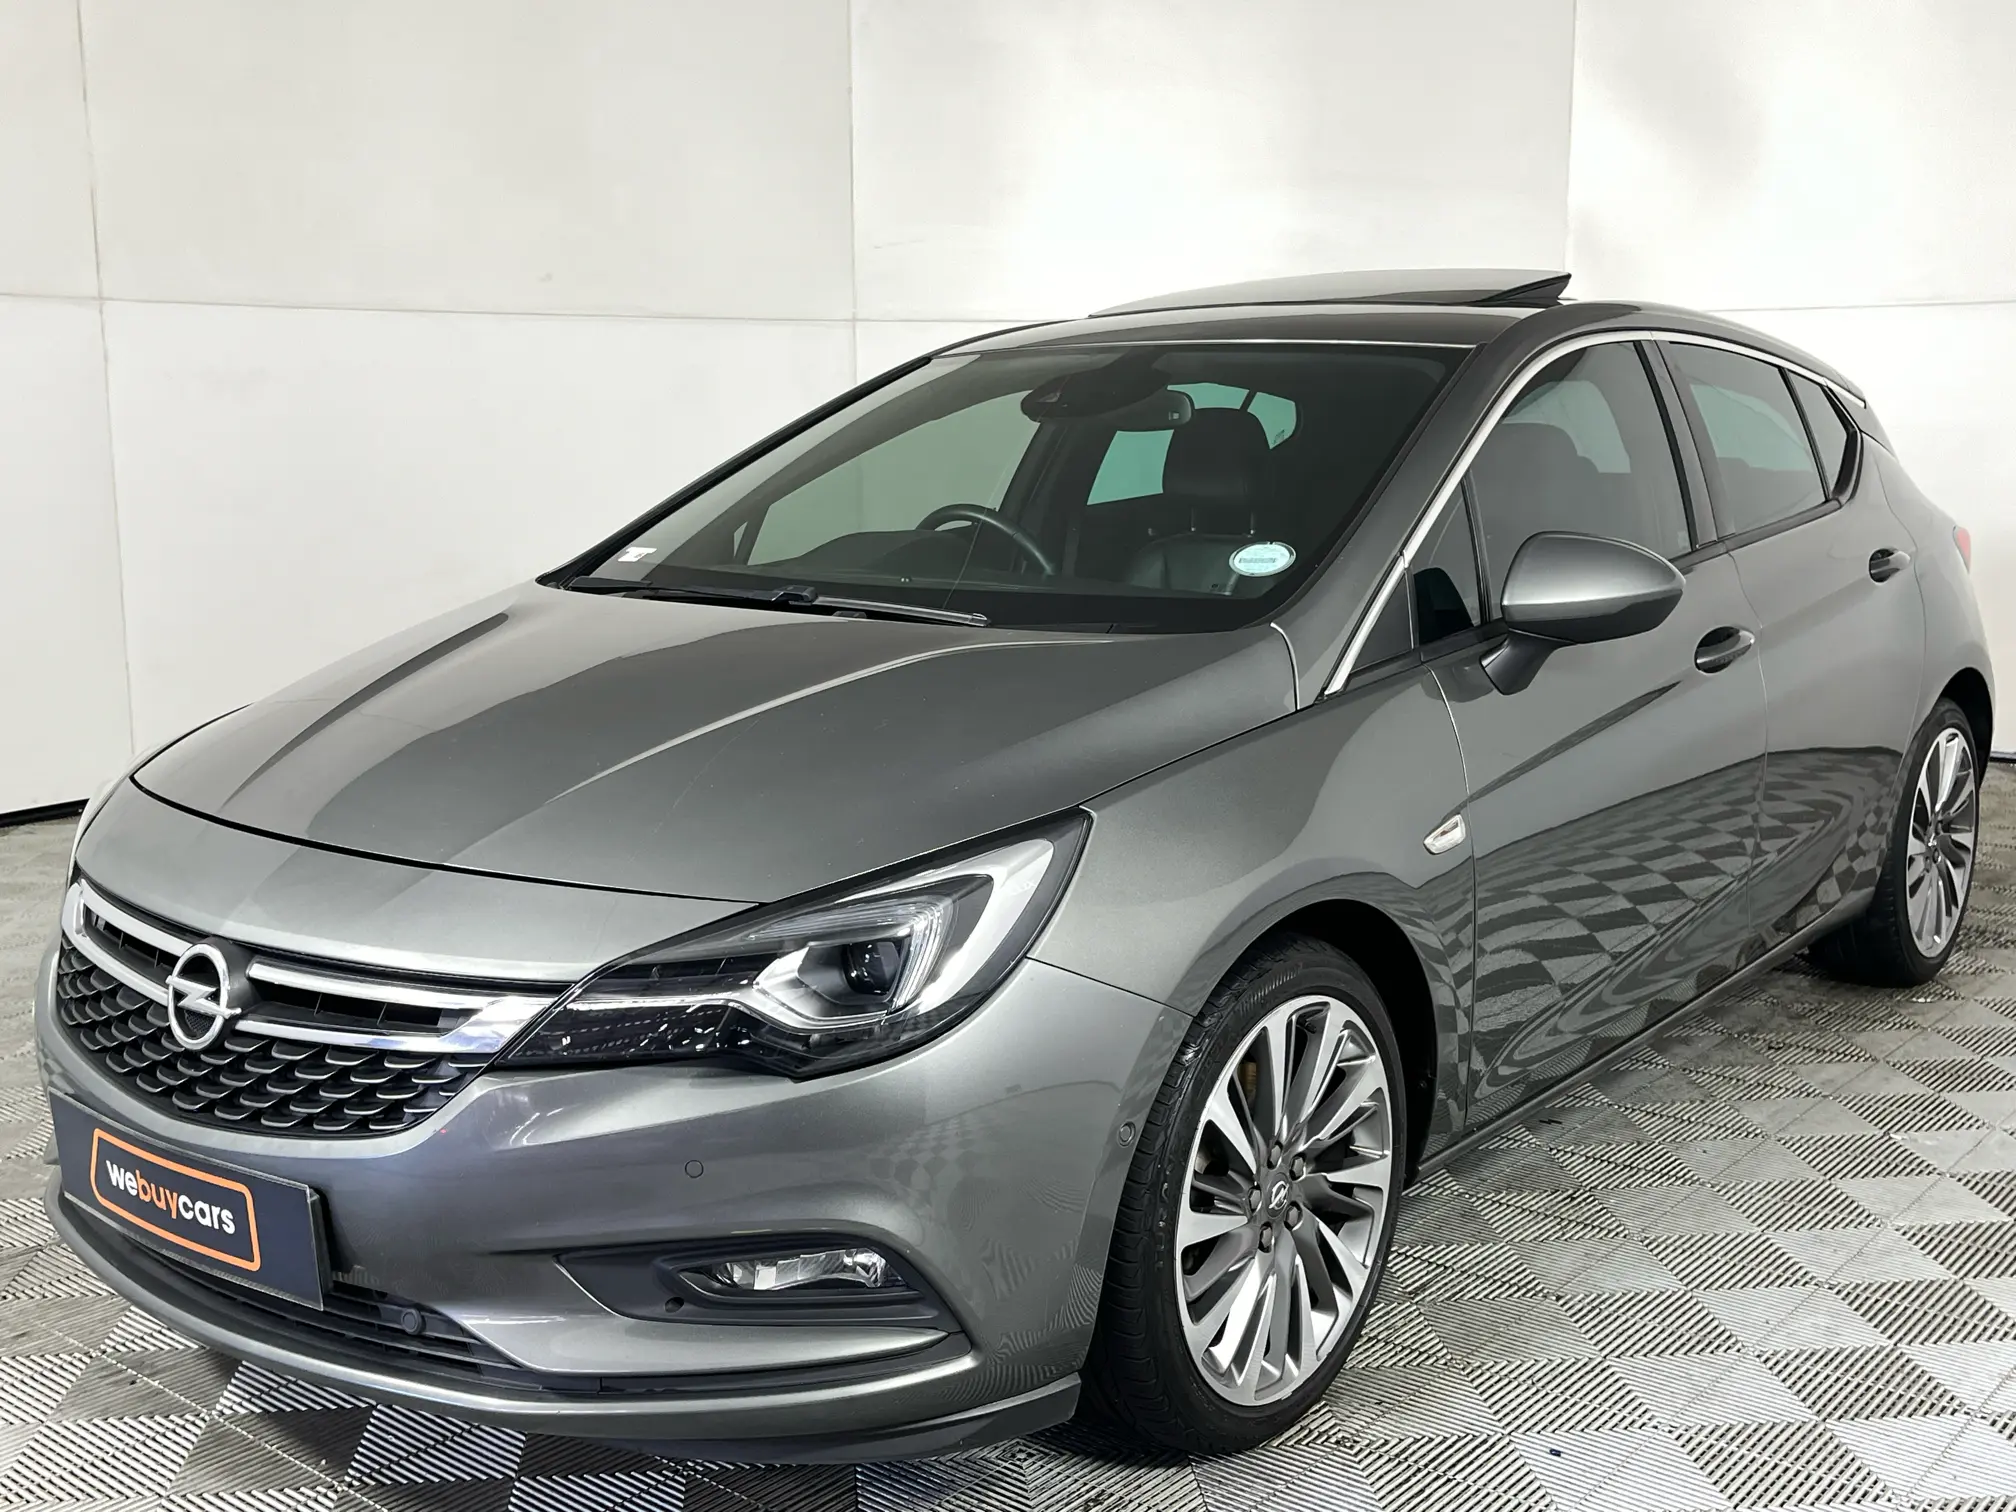 2019 Opel Astra 1.6T Sport (5dr)